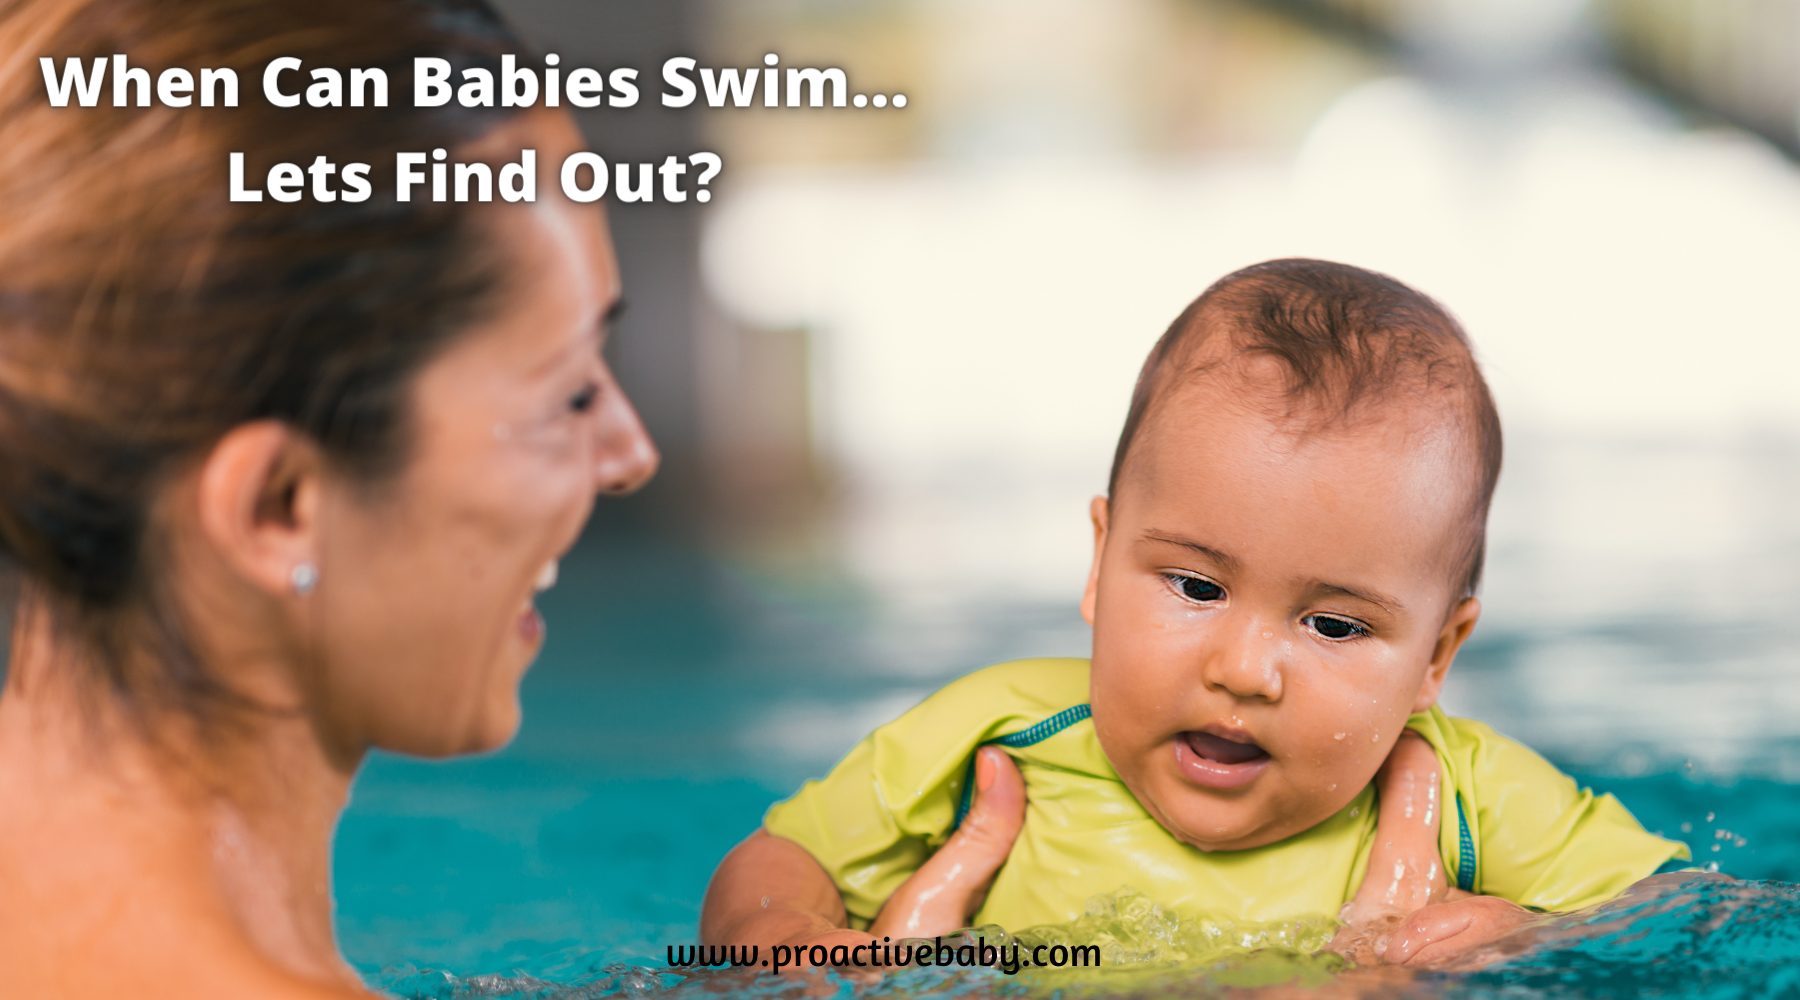 When Can Babies Swim?